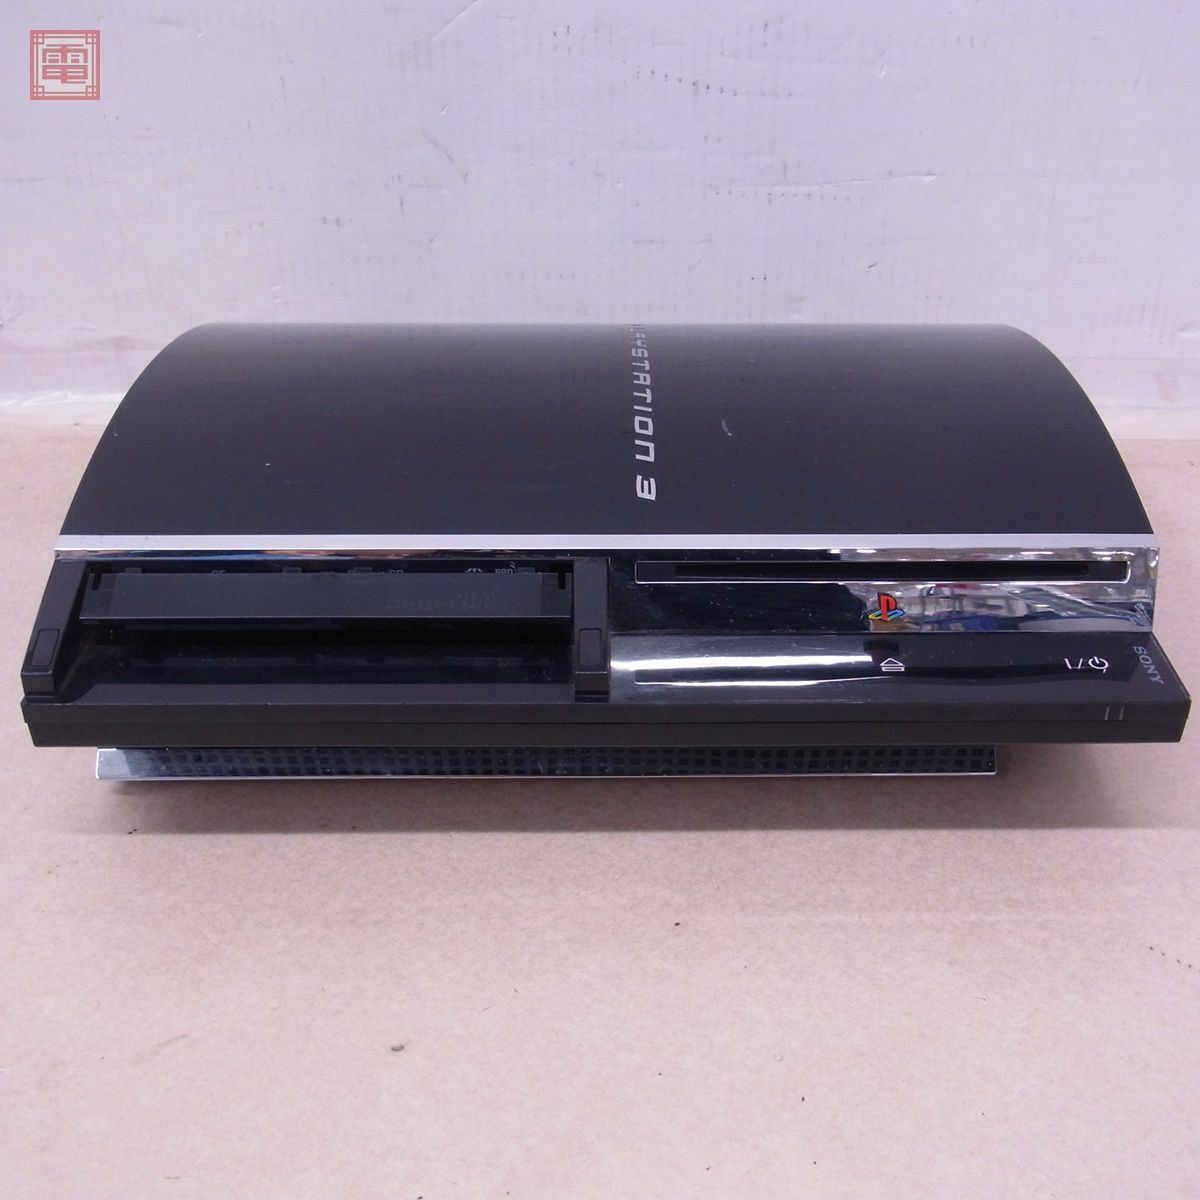  operation goods PS3 PlayStation 3 body only initial model CECHA00 clear black PS2 standard correspondence HDD none Sony SONY[20